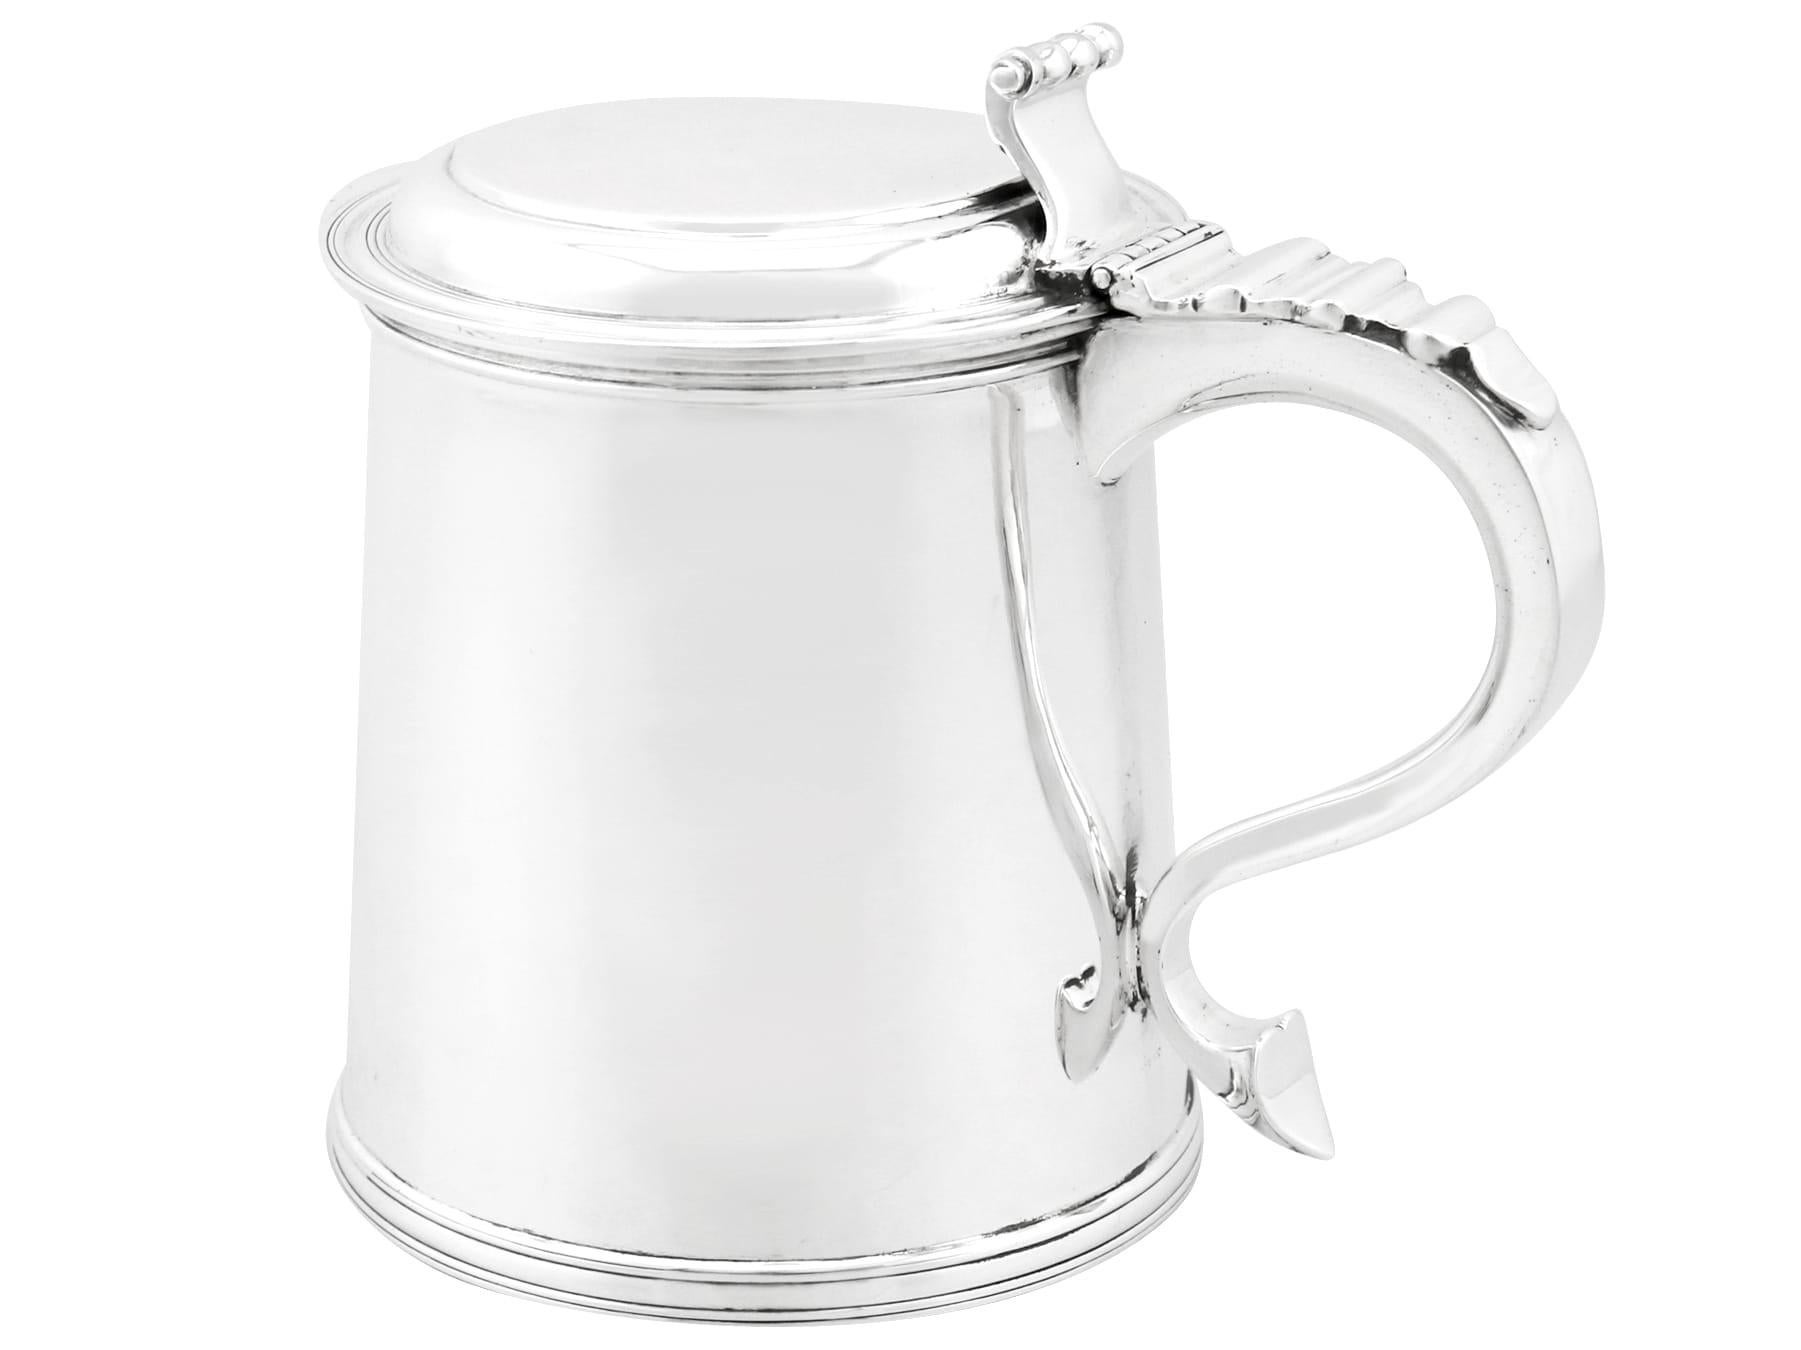 An exceptional, fine and impressive antique George V English sterling silver flat topped tankard made by Elkington and Co Ltd; part of our wine and drink related silverware collection.

This exceptional antique George V sterling silver tankard has